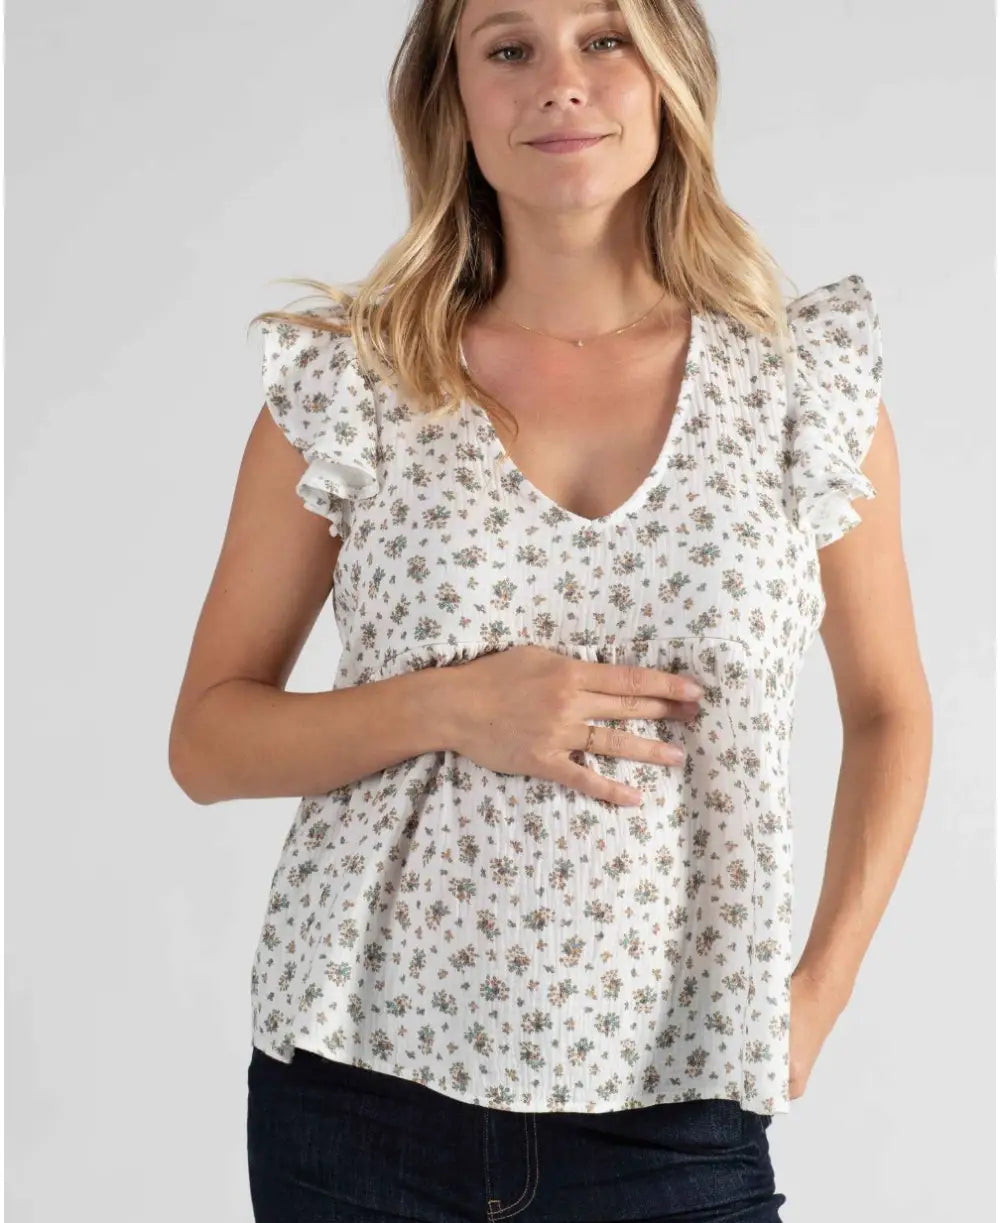 Butterfly top for pregnancy and breastfeeding Suzanne